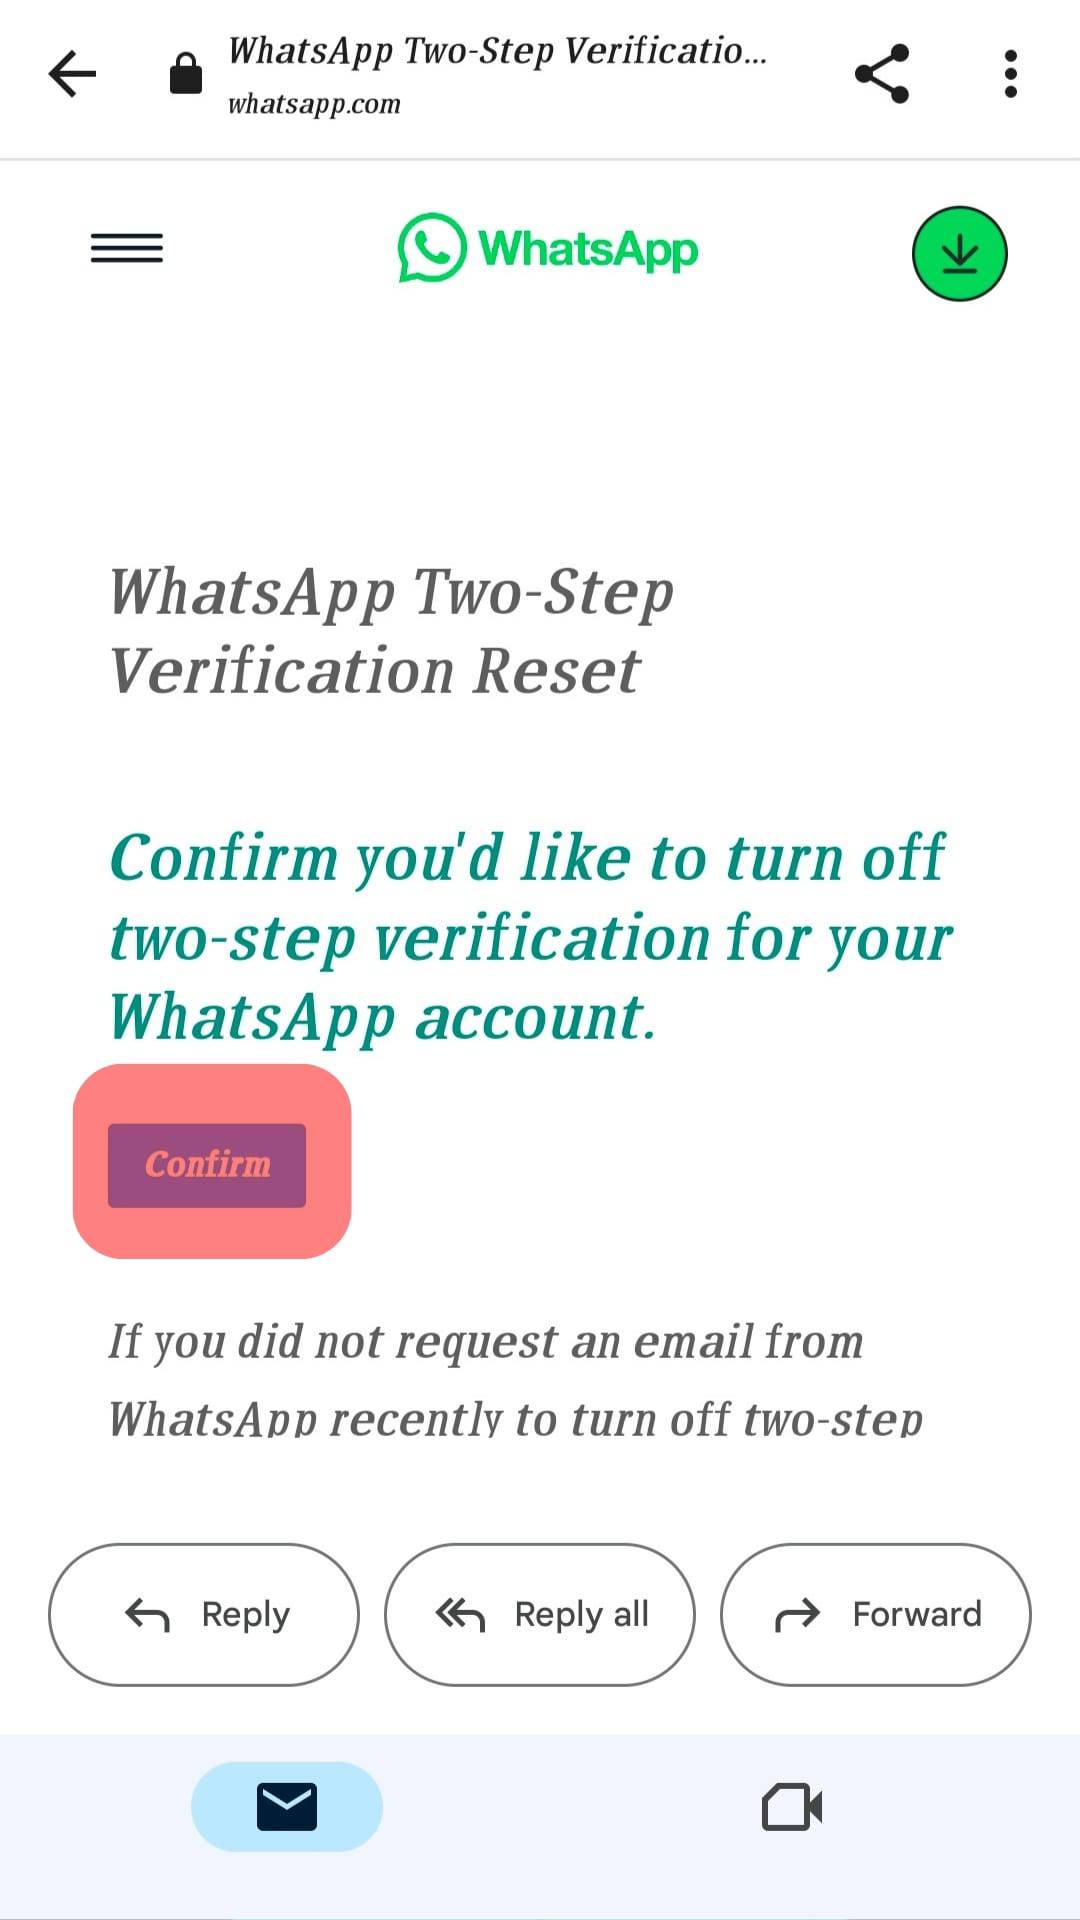 Tap On 'Confirm' To Disable The Two-Step Verification.